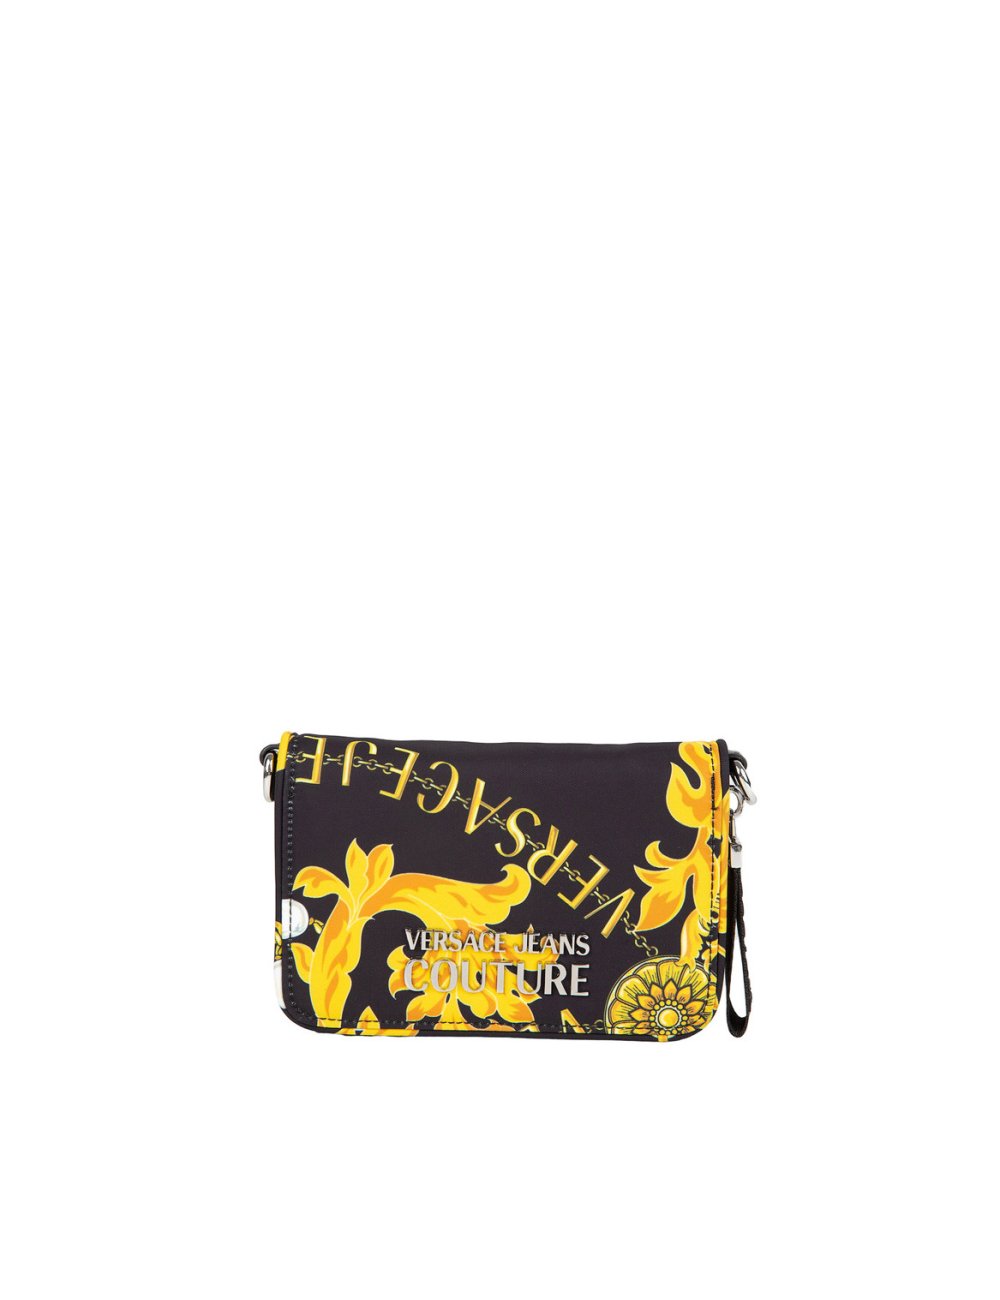 FW23-24 Clutch con stampa